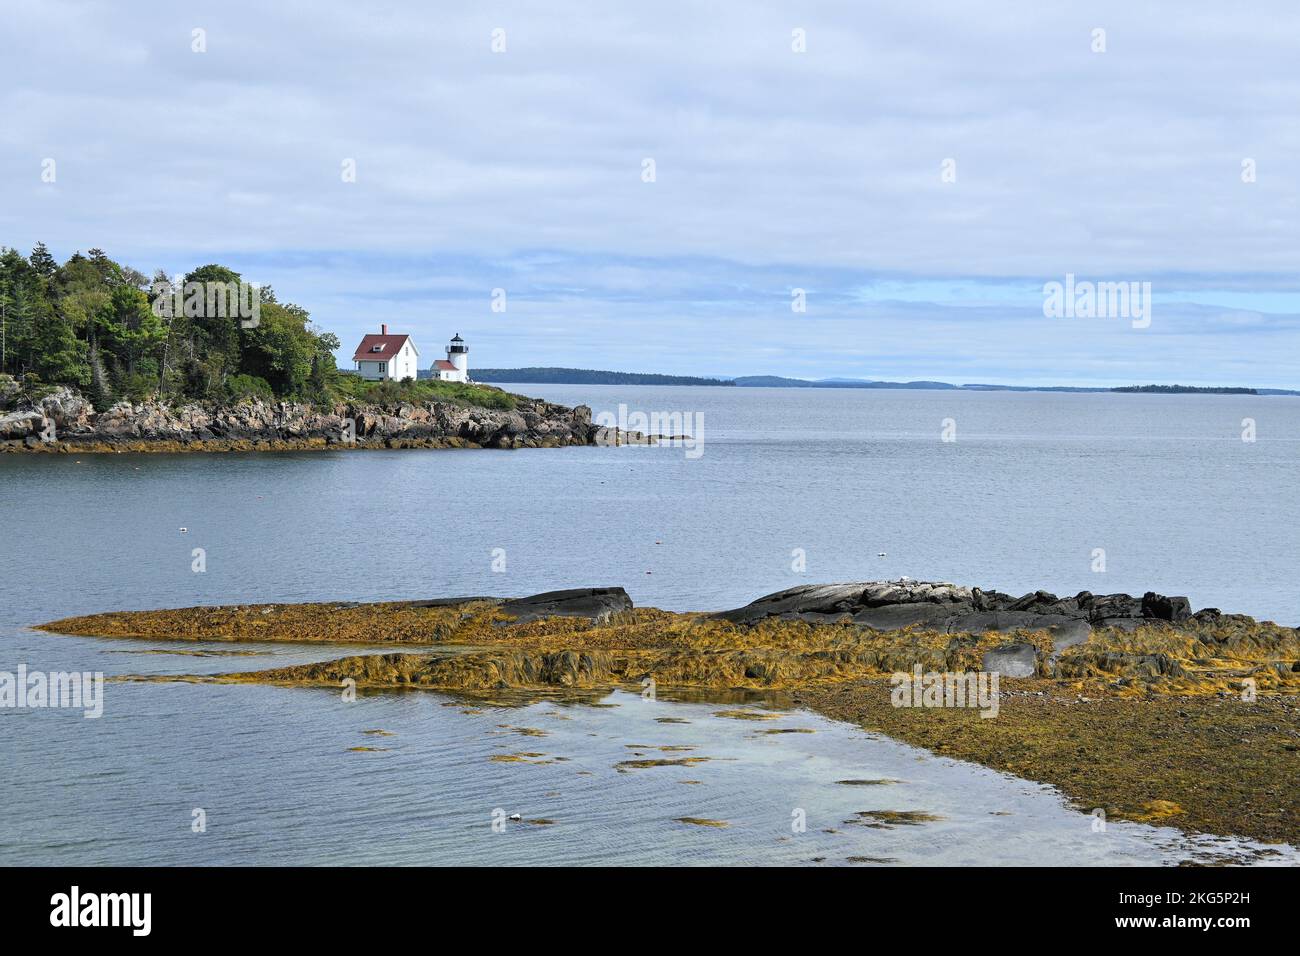 A white lighthouse and keeper's house sits on a spit of land jutting into the sea; golden seaweed covers rocks in the foreground Stock Photo